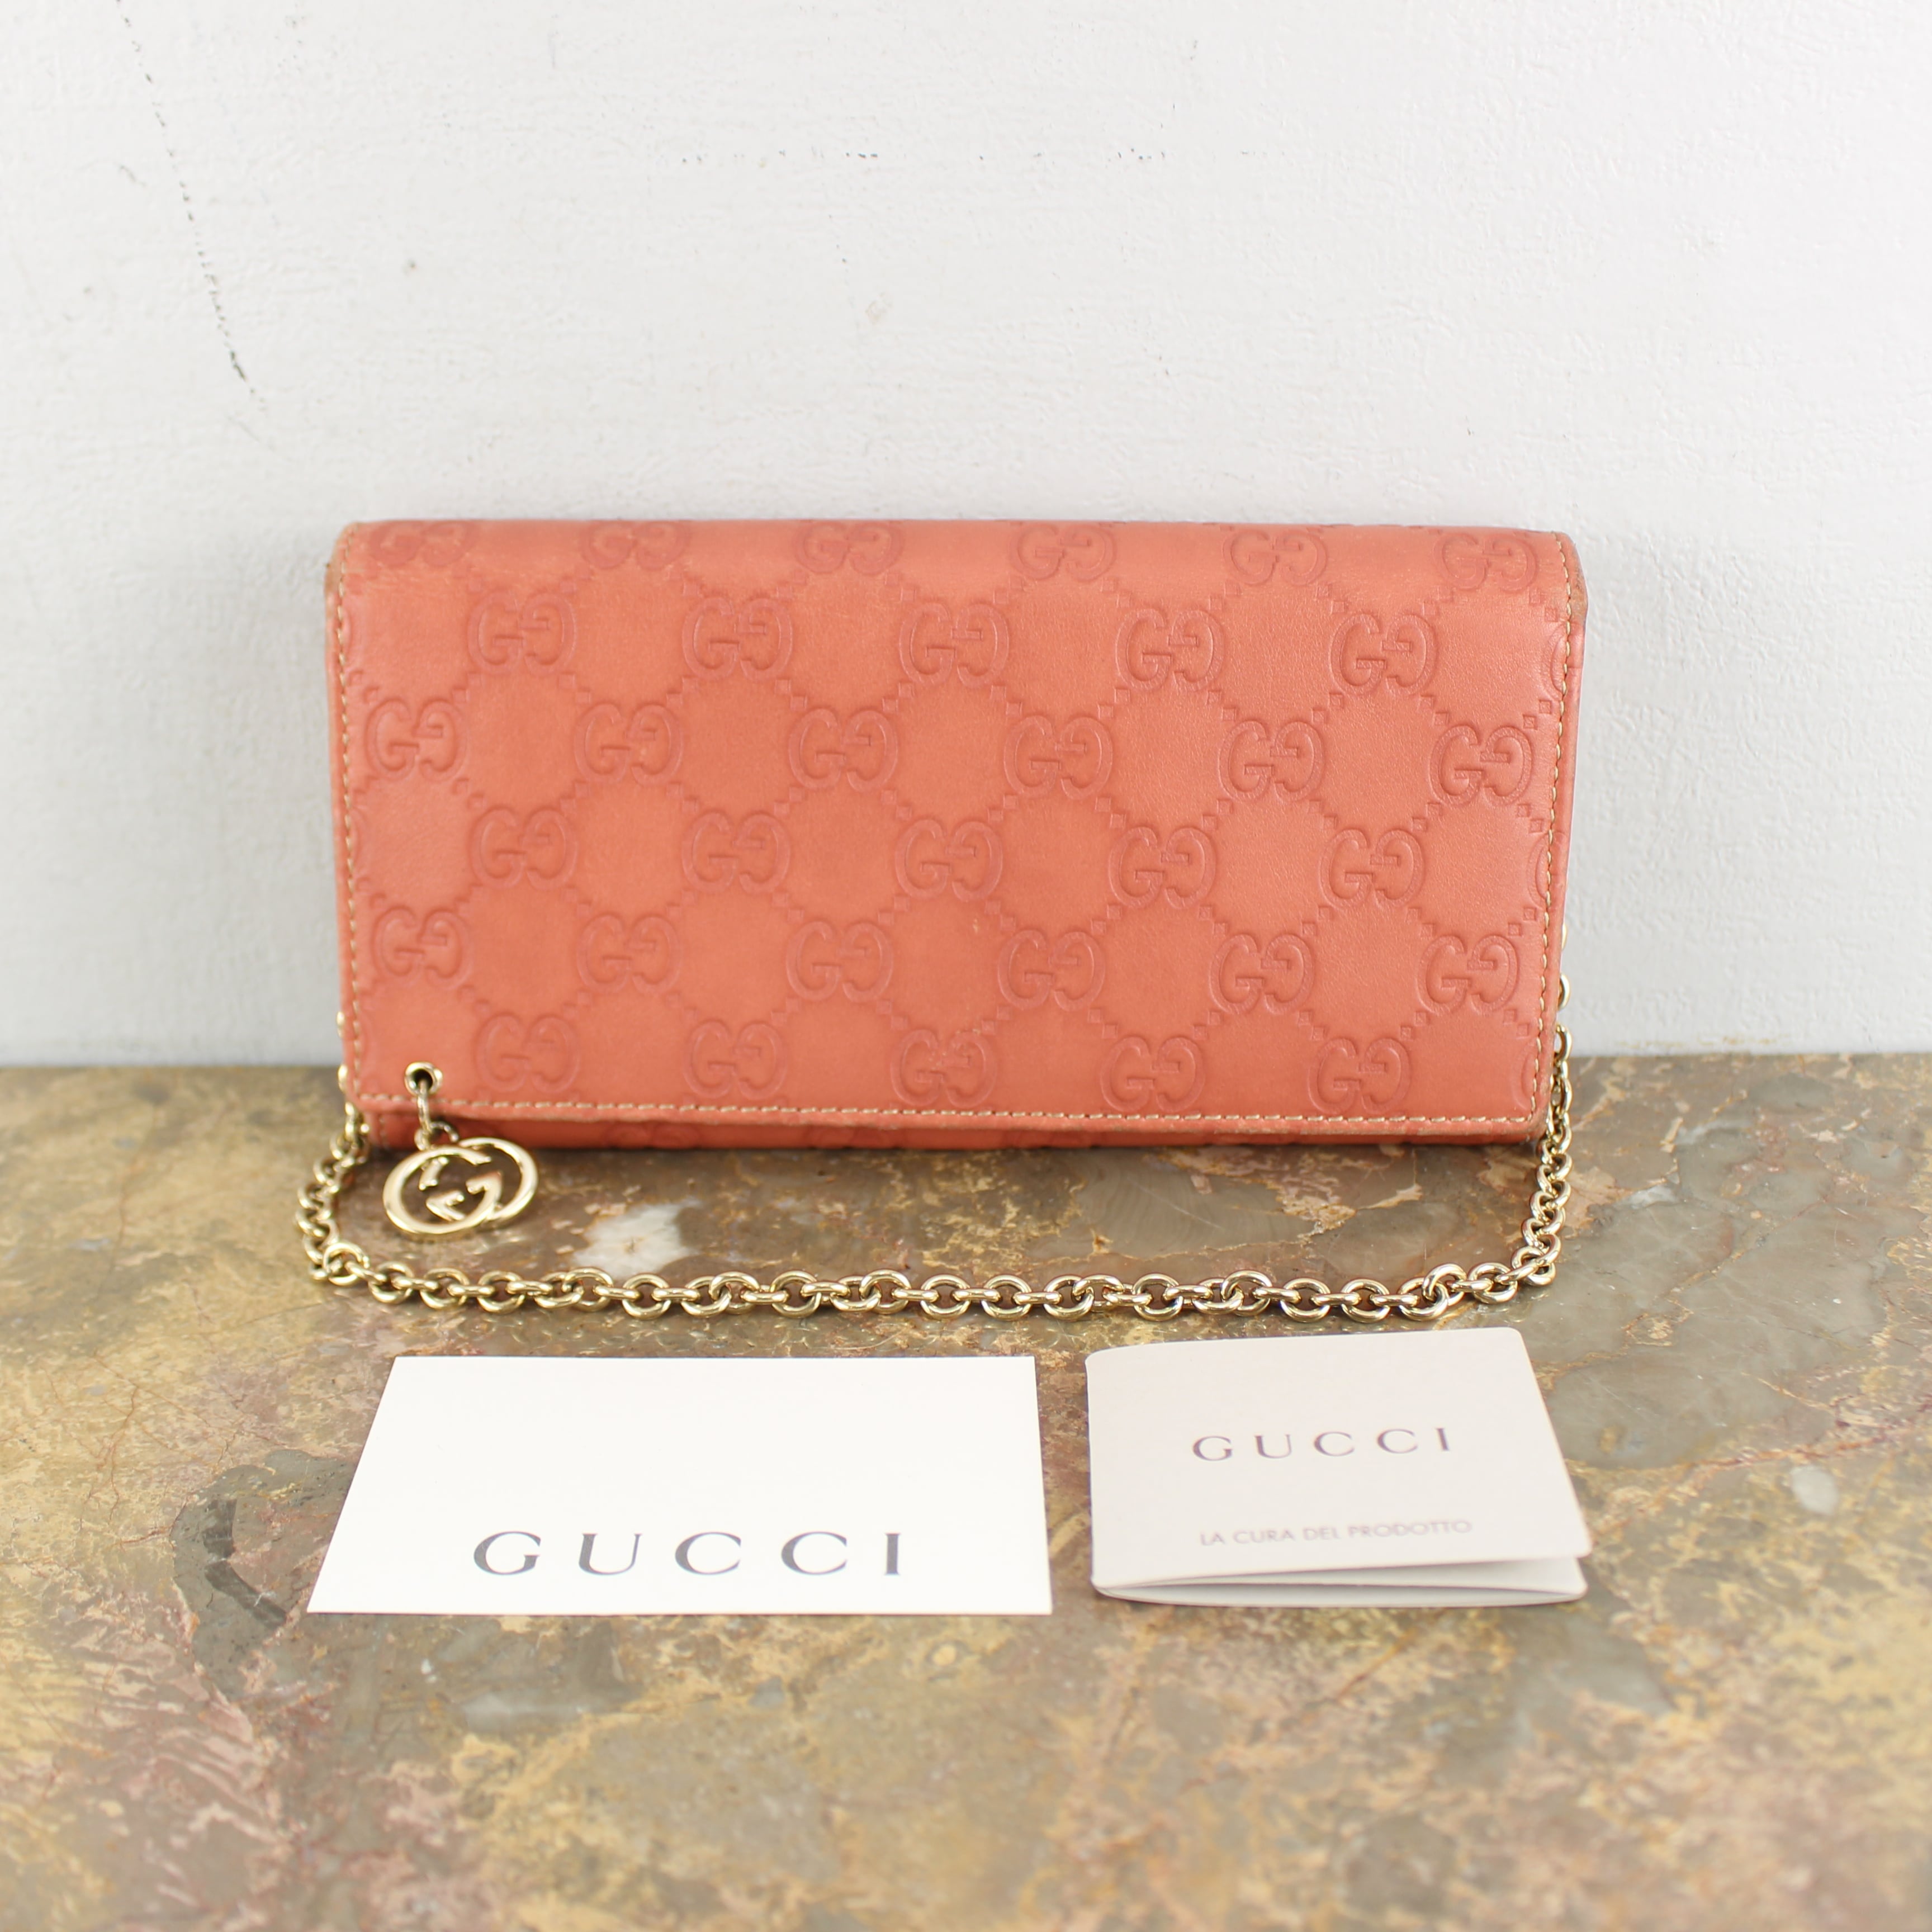 GUCCI GG PATTERNED EMBOSSED LEATHER CHAIN WALLET MADE IN ITALY